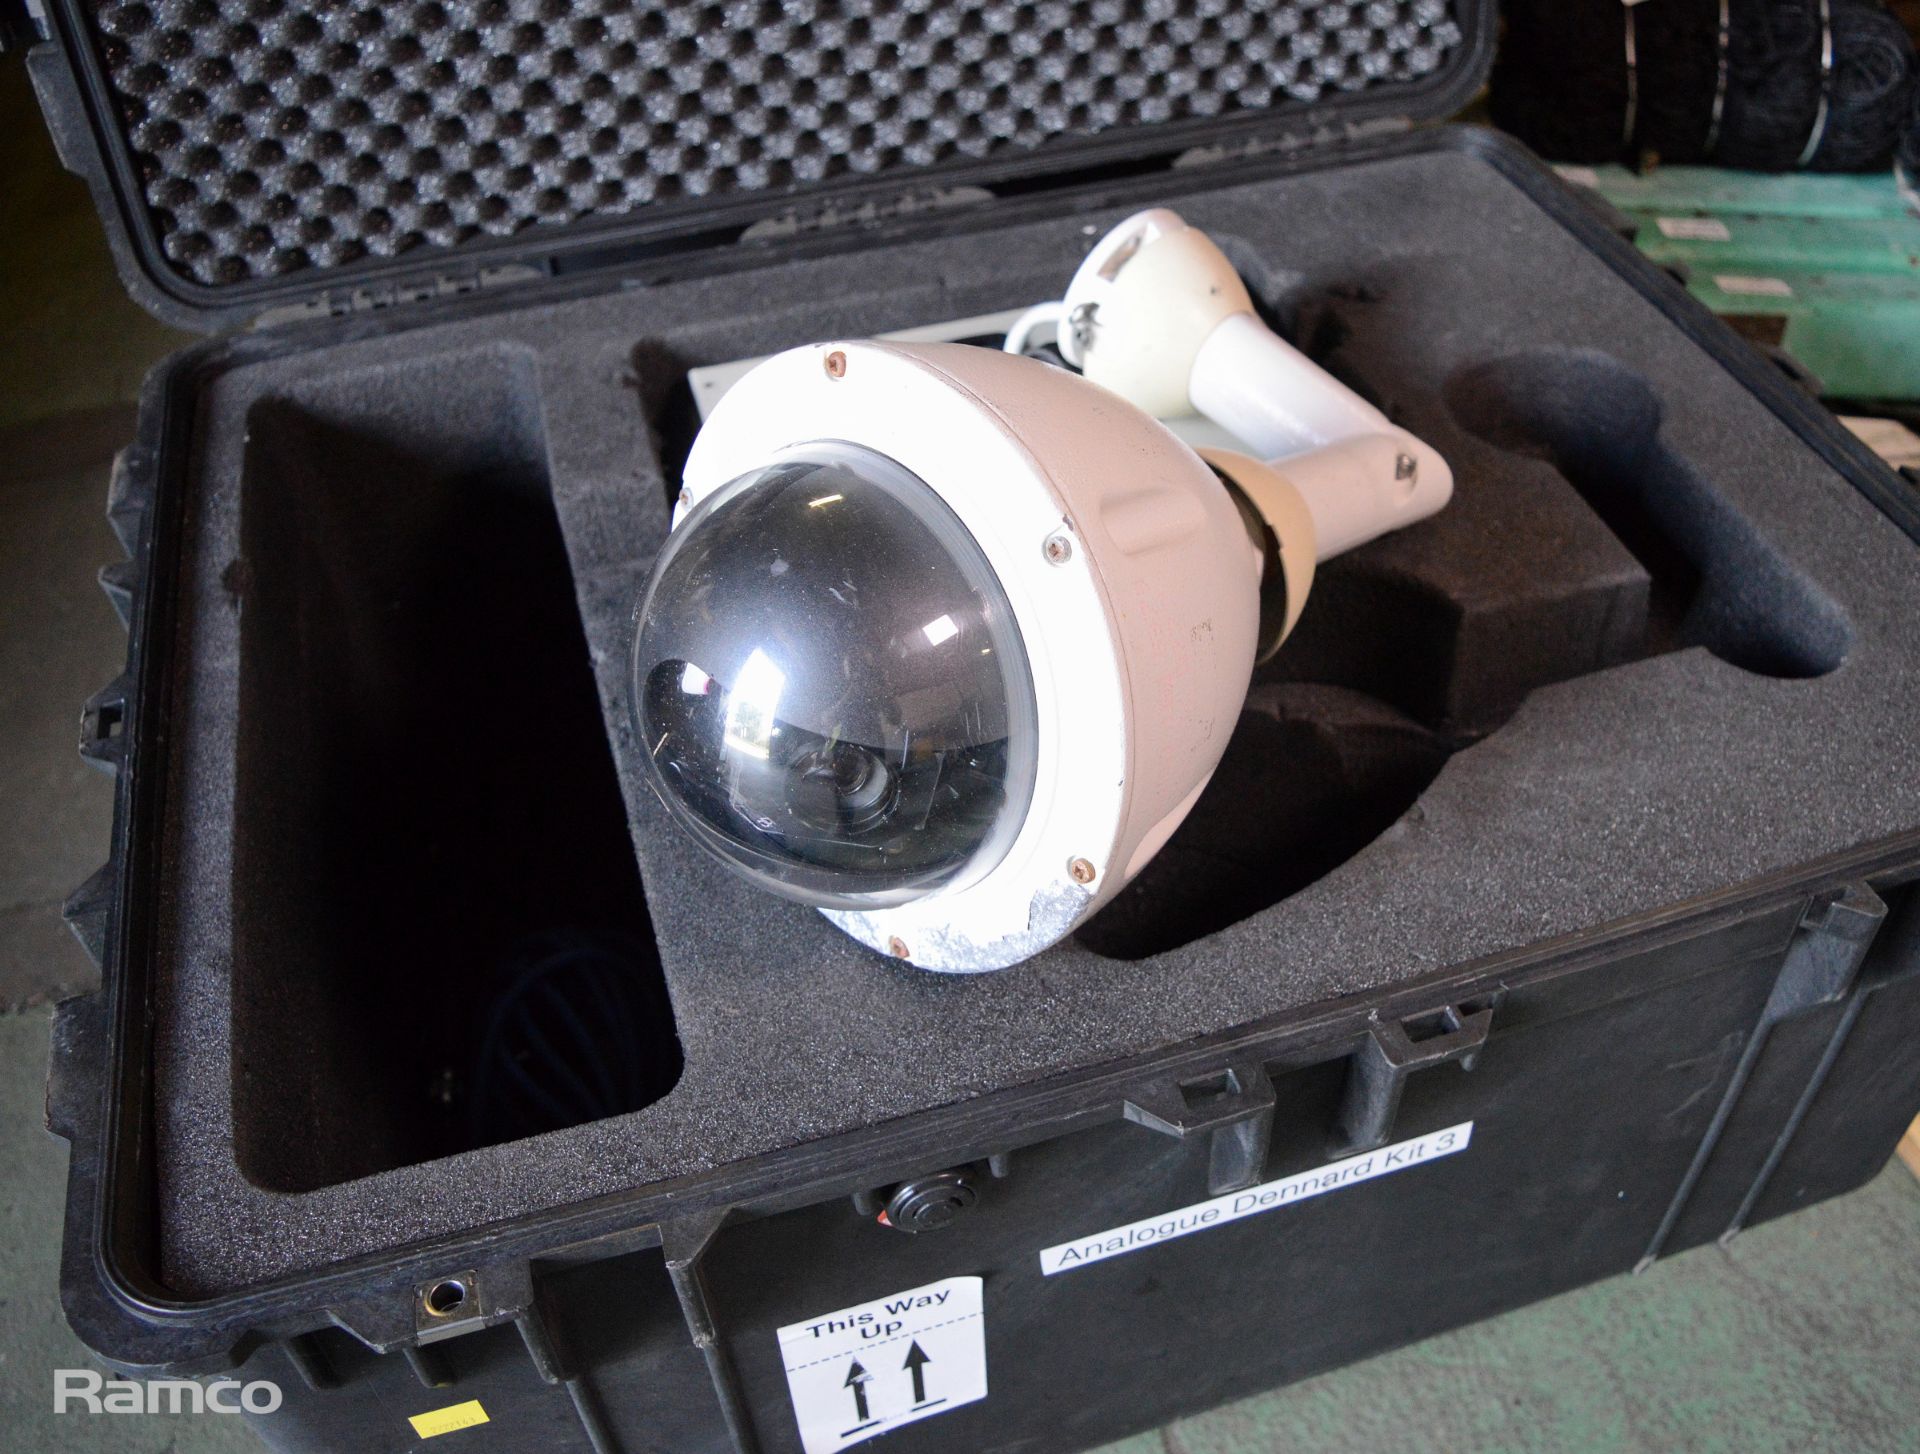 Dennard Analogue Dome Camera With Control Box & Case - Image 3 of 8